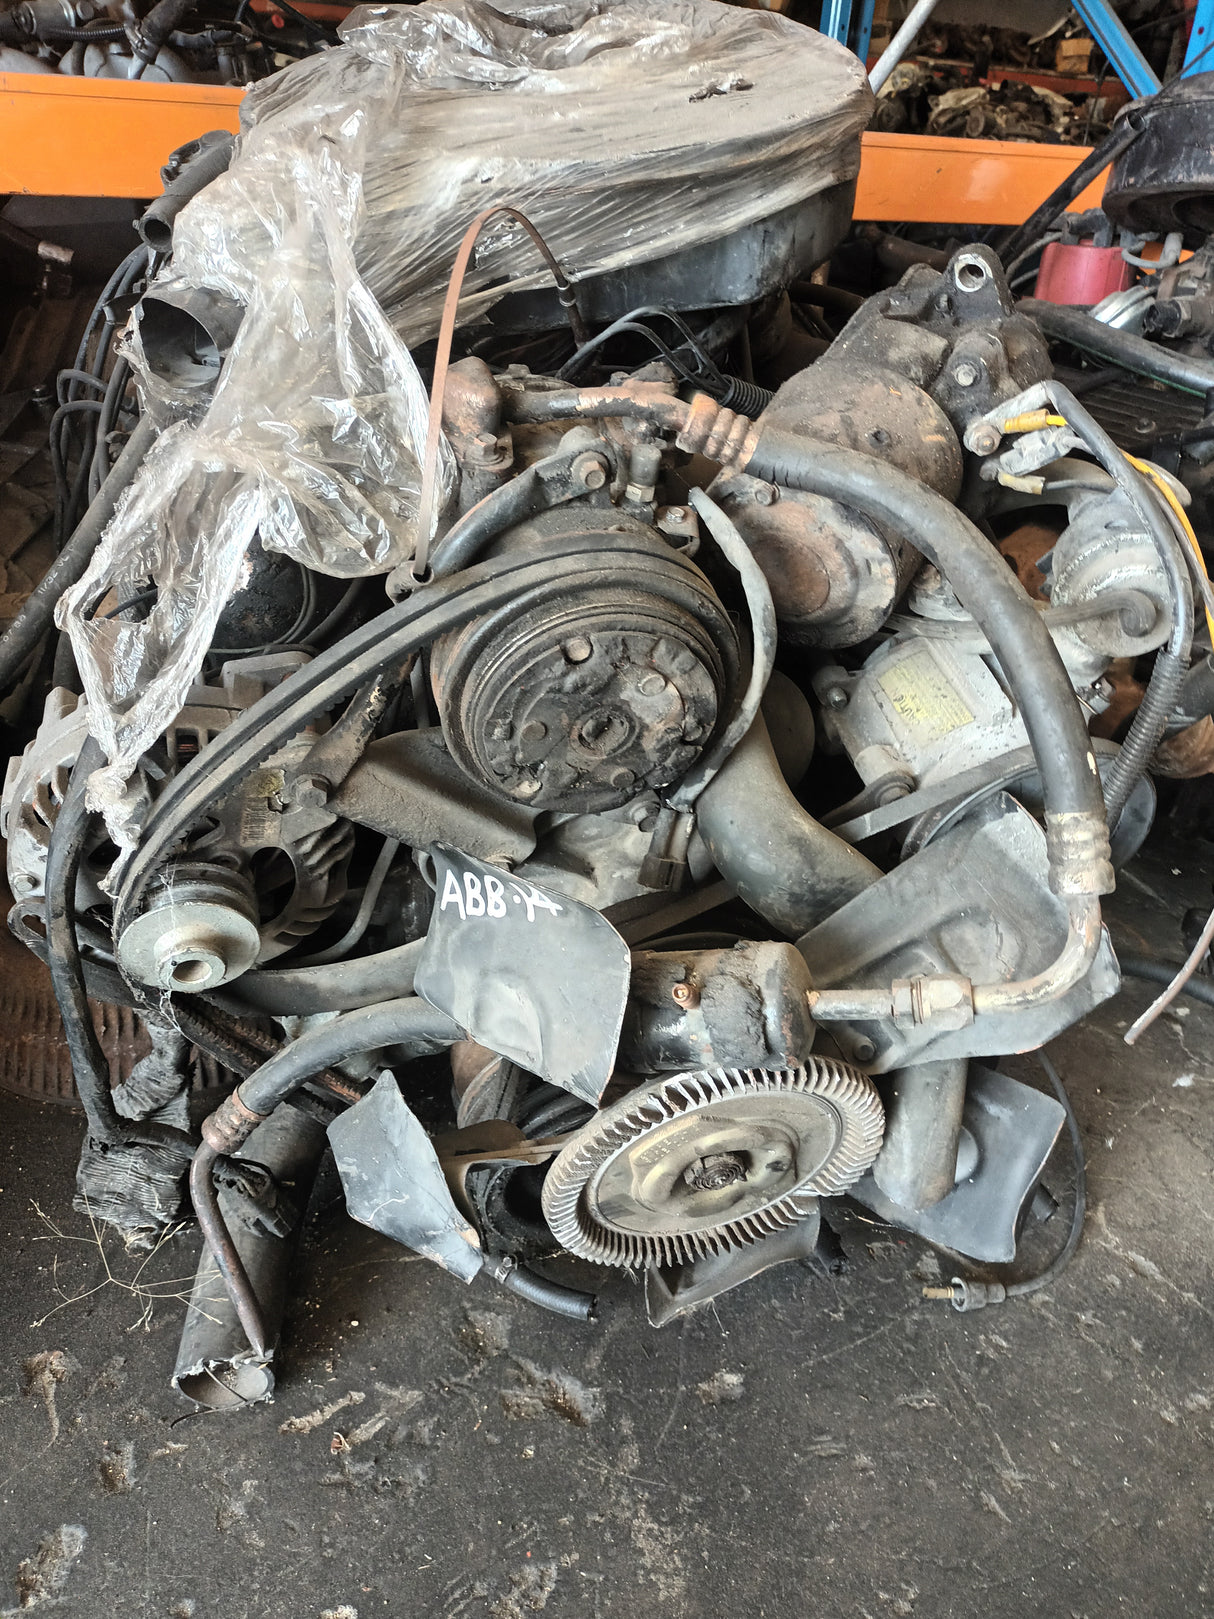 CHRYSLER 318 ENGINE 2 BRL. COMPLETE. IN REBUILDABLE CONDITION.